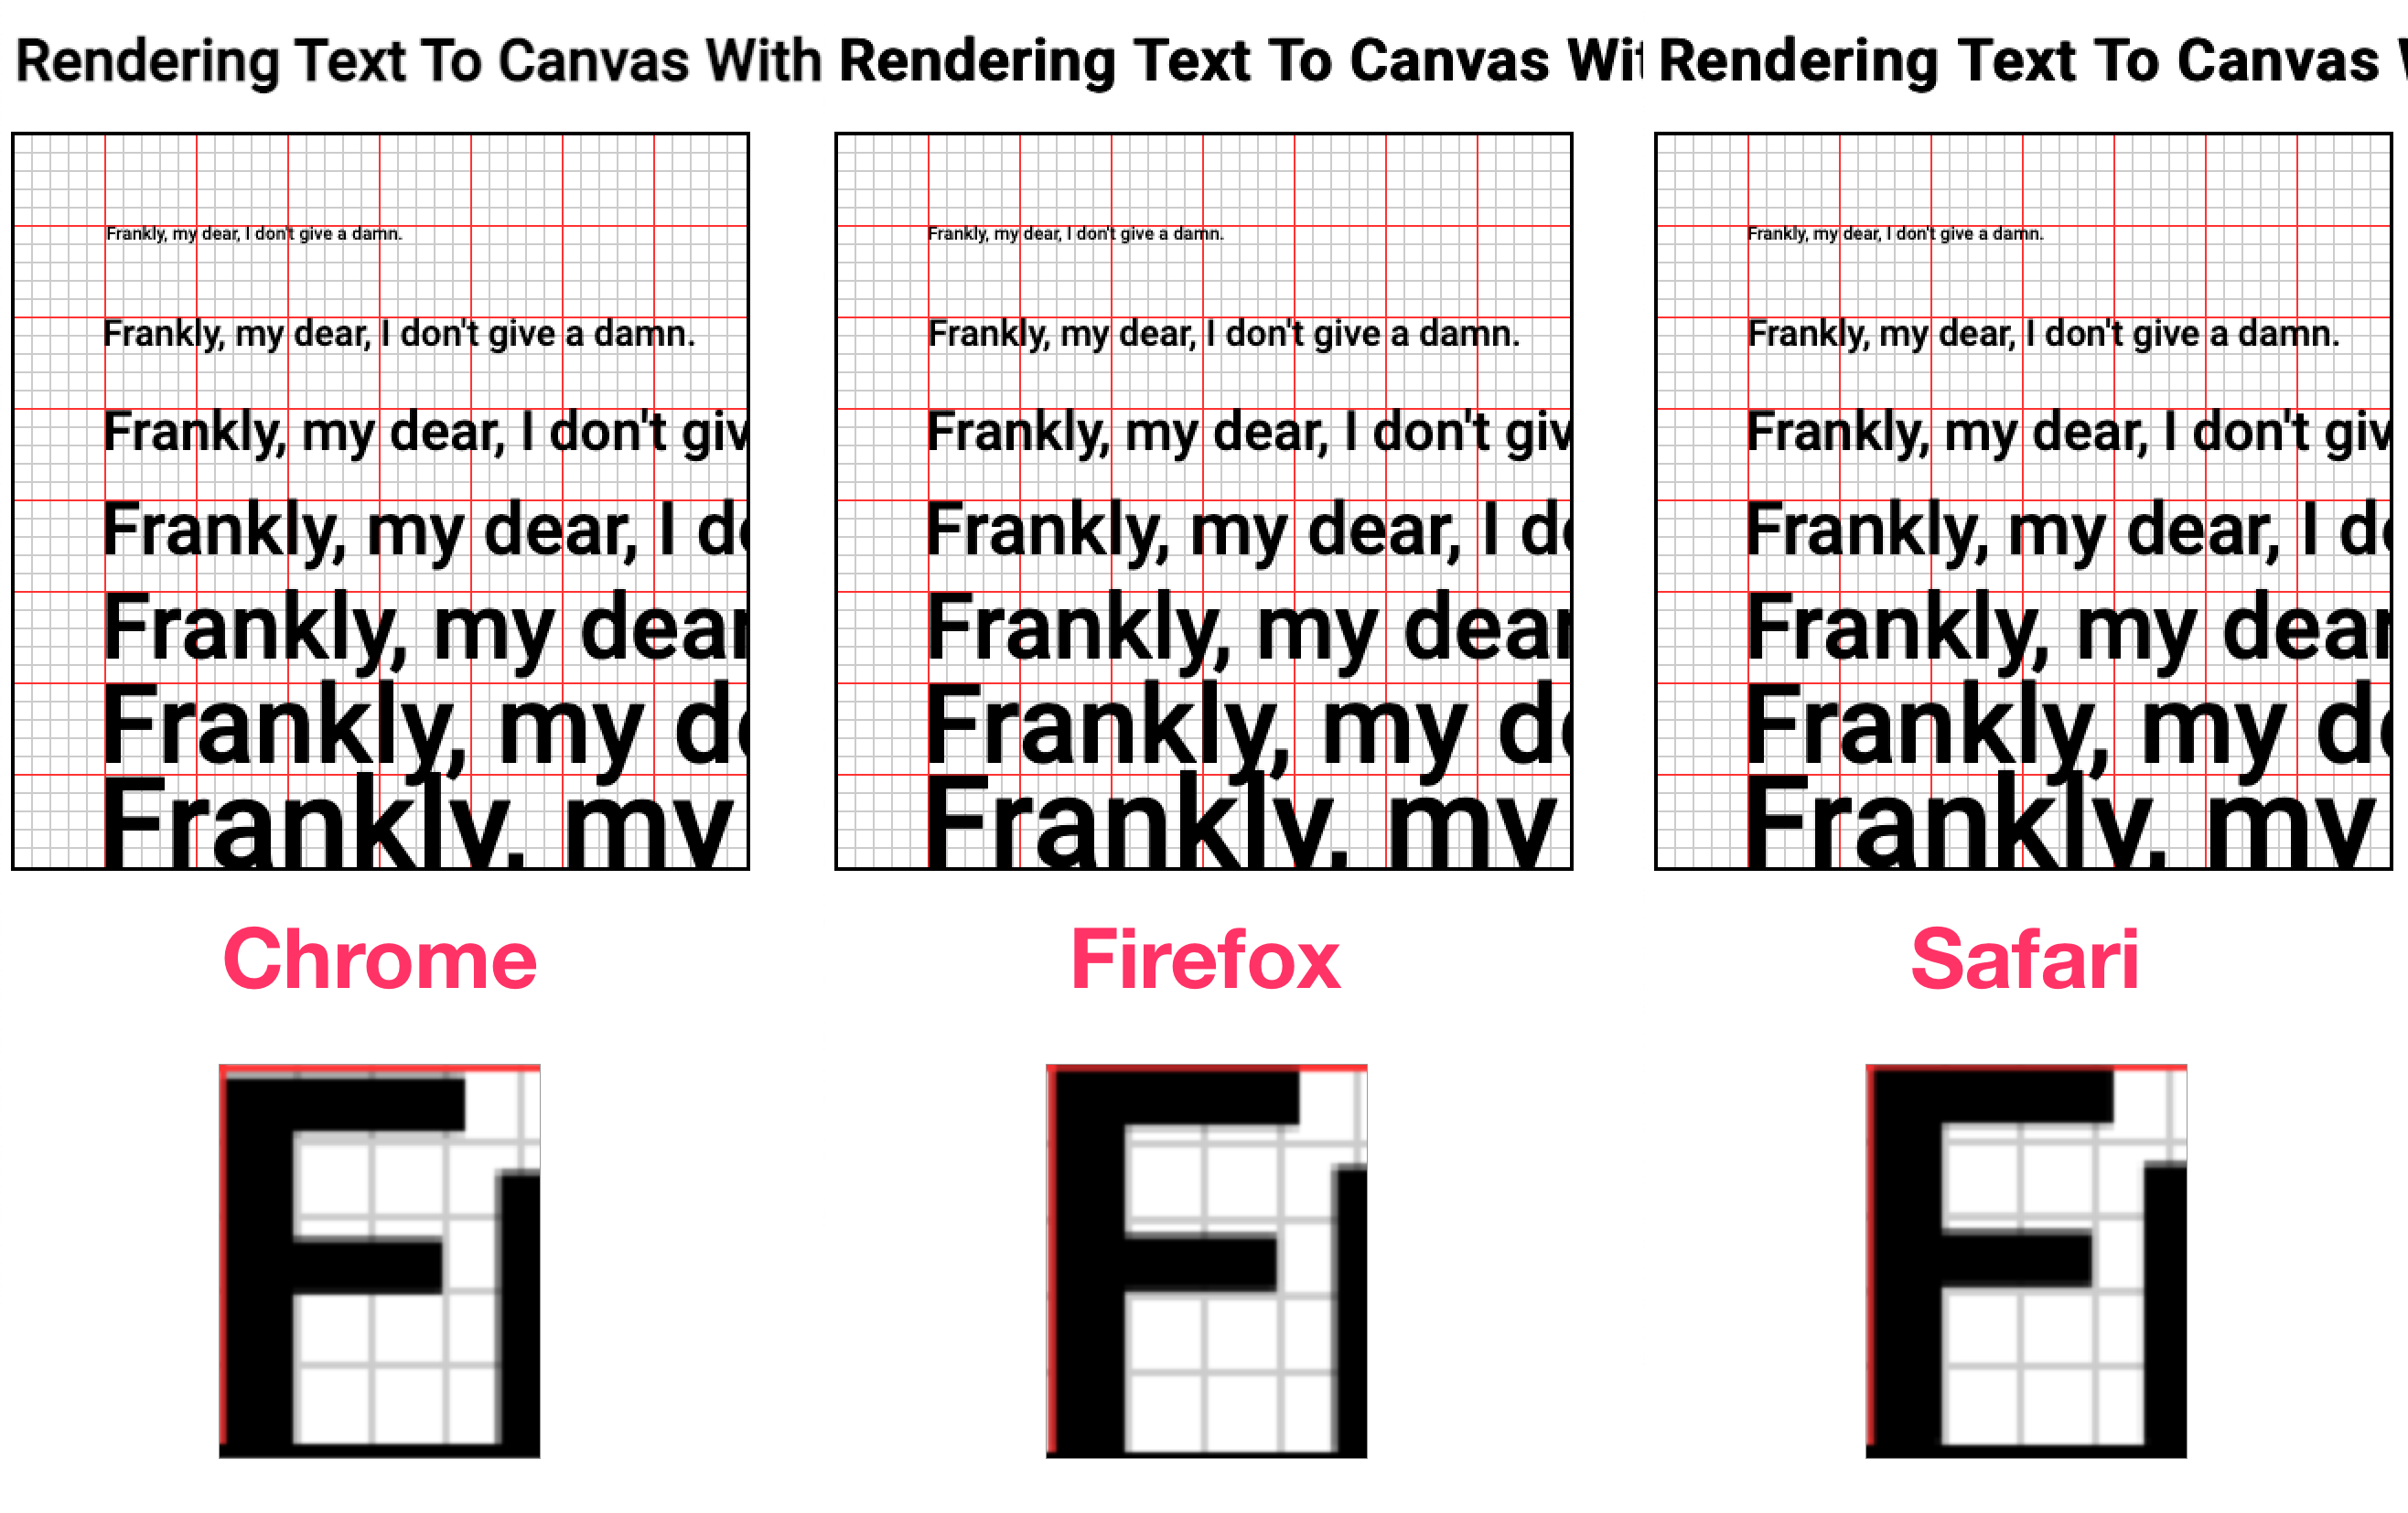 Text being rendered to Canvas on Chrome, Firefox, and Safari width adjusted offsets shows that text baselines are more-or-less consistent in each browser.